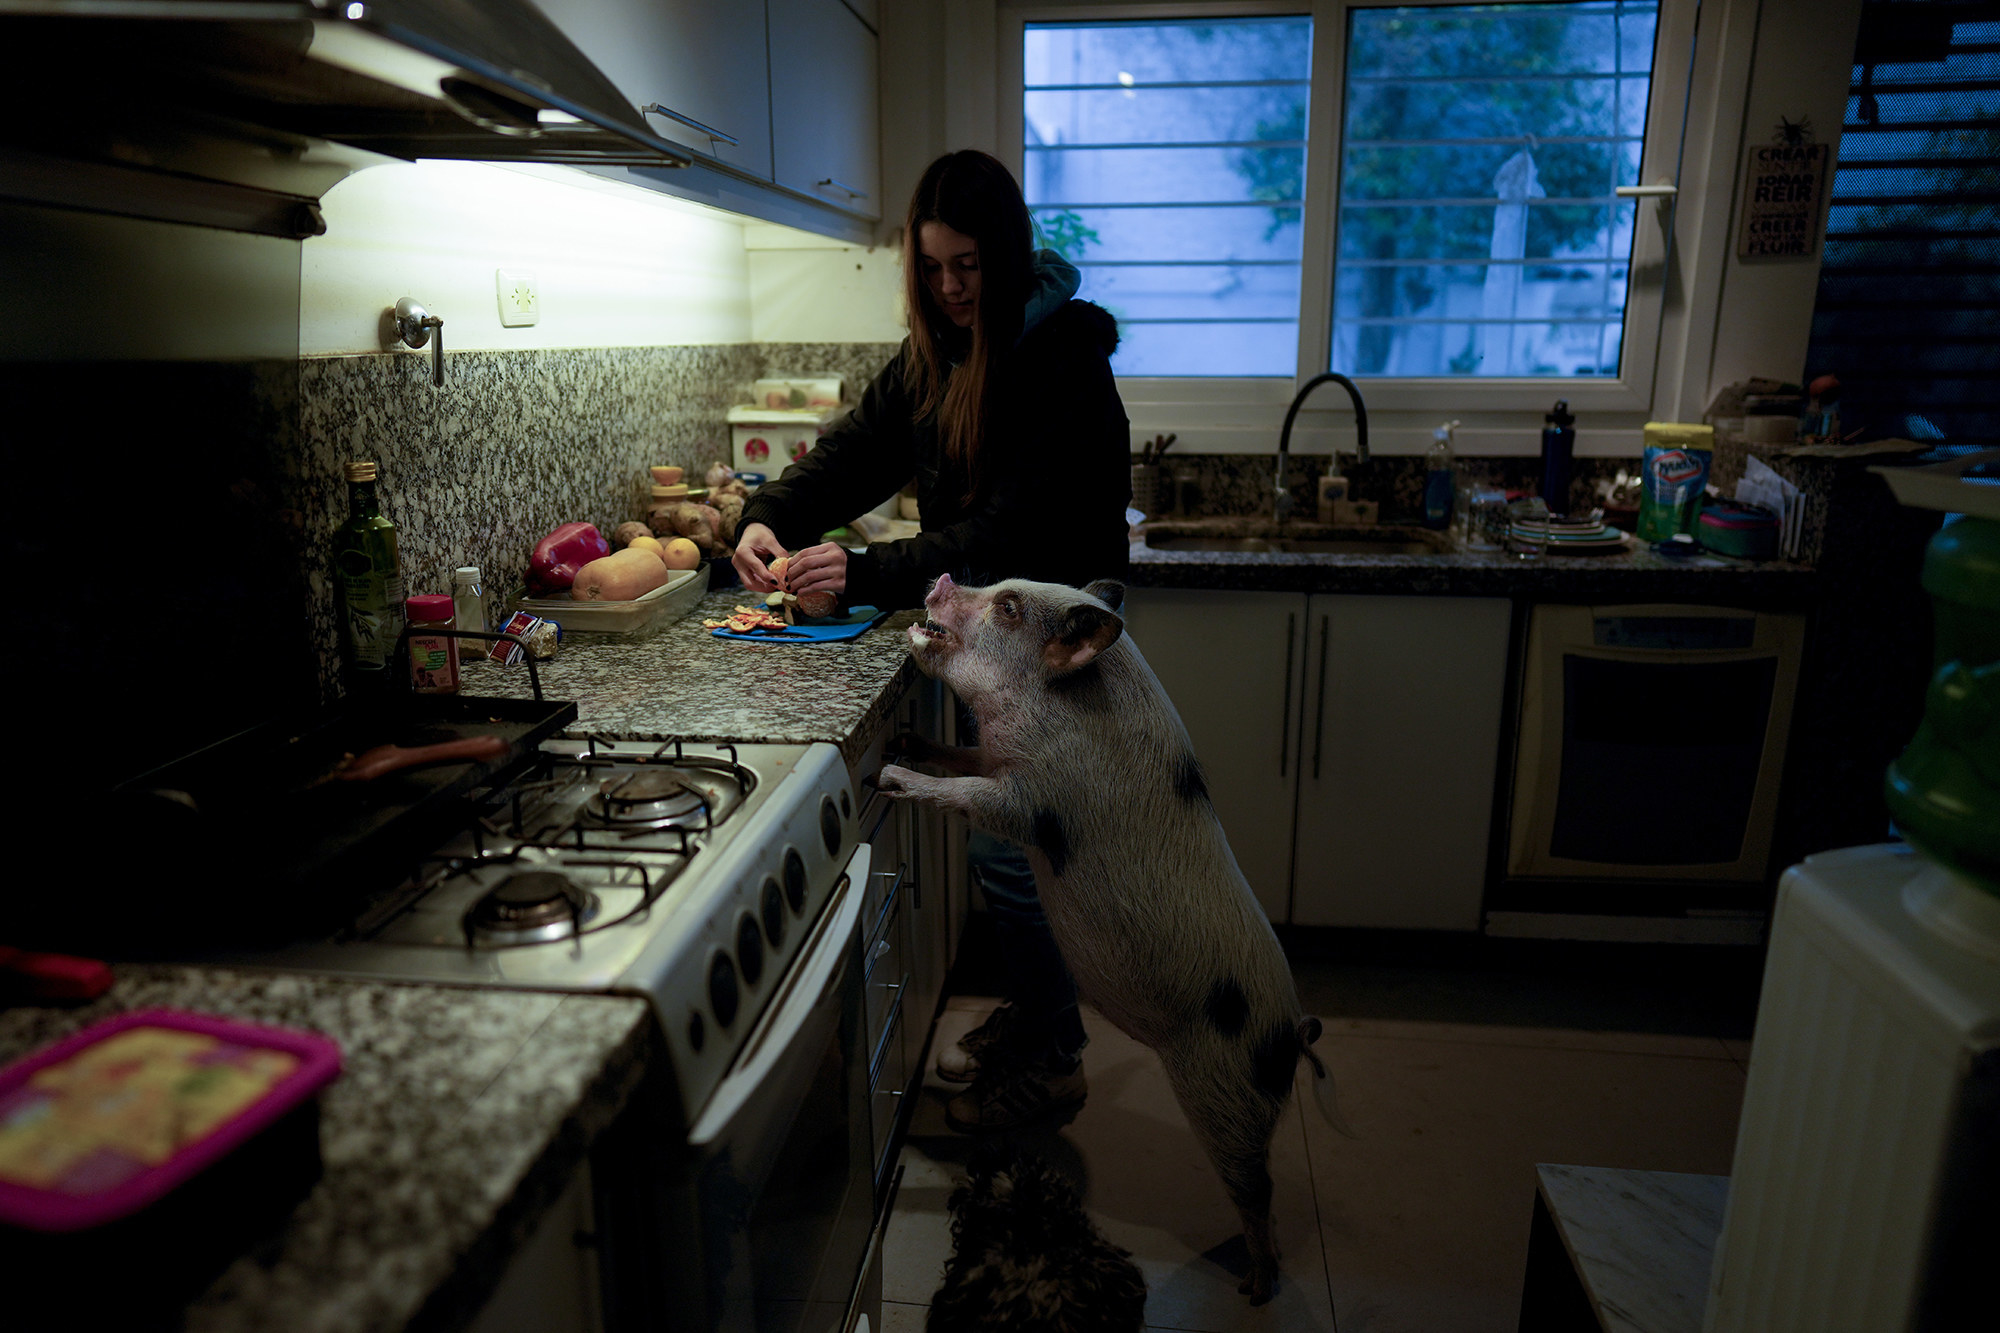 Woman stands at her kitchen counter preparing food as pig standing on its haunches leans against the counter with its snout on the counter